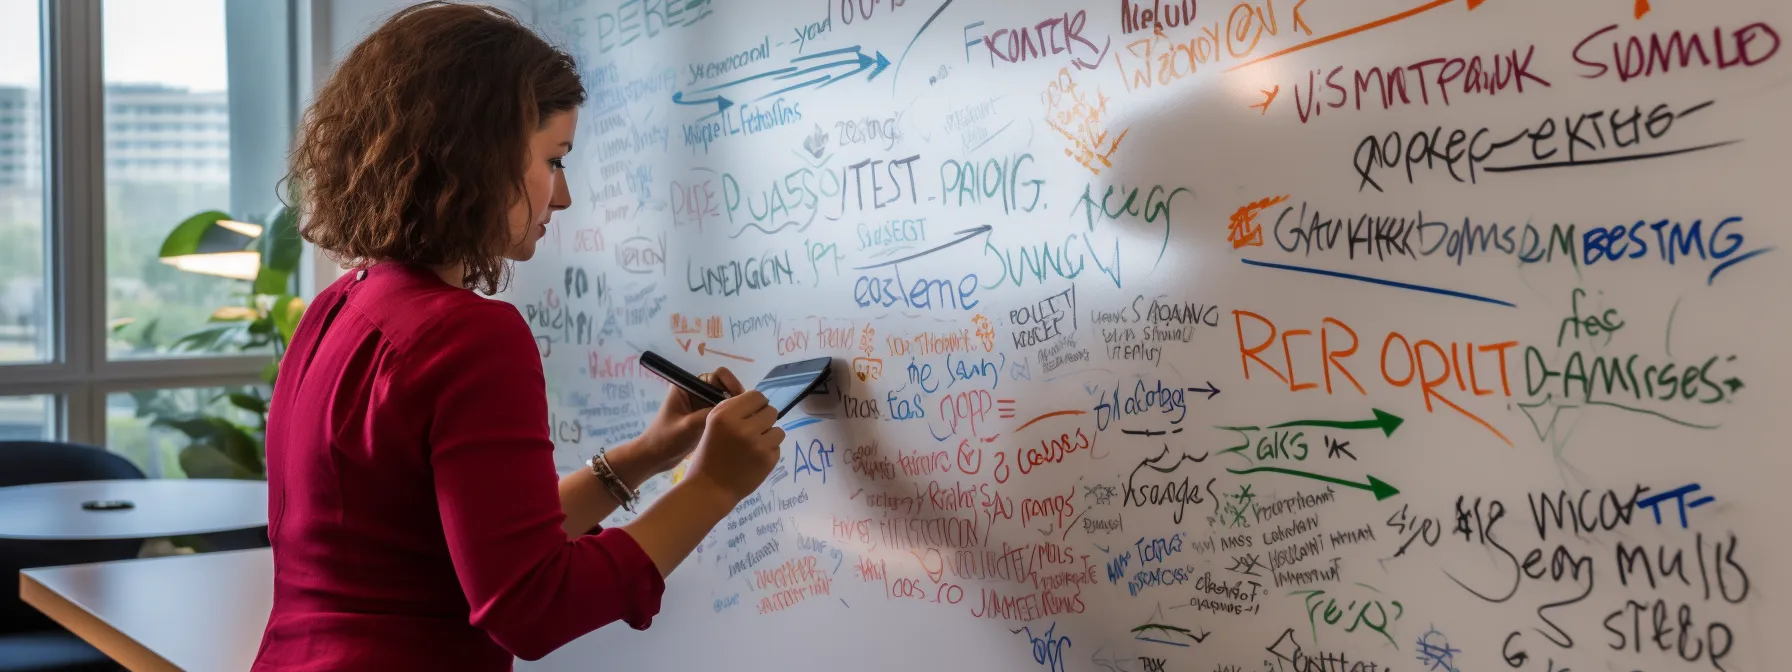 a person writing on a whiteboard with keywords and arrows, symbolizing the connection between content marketing and boosting seo.